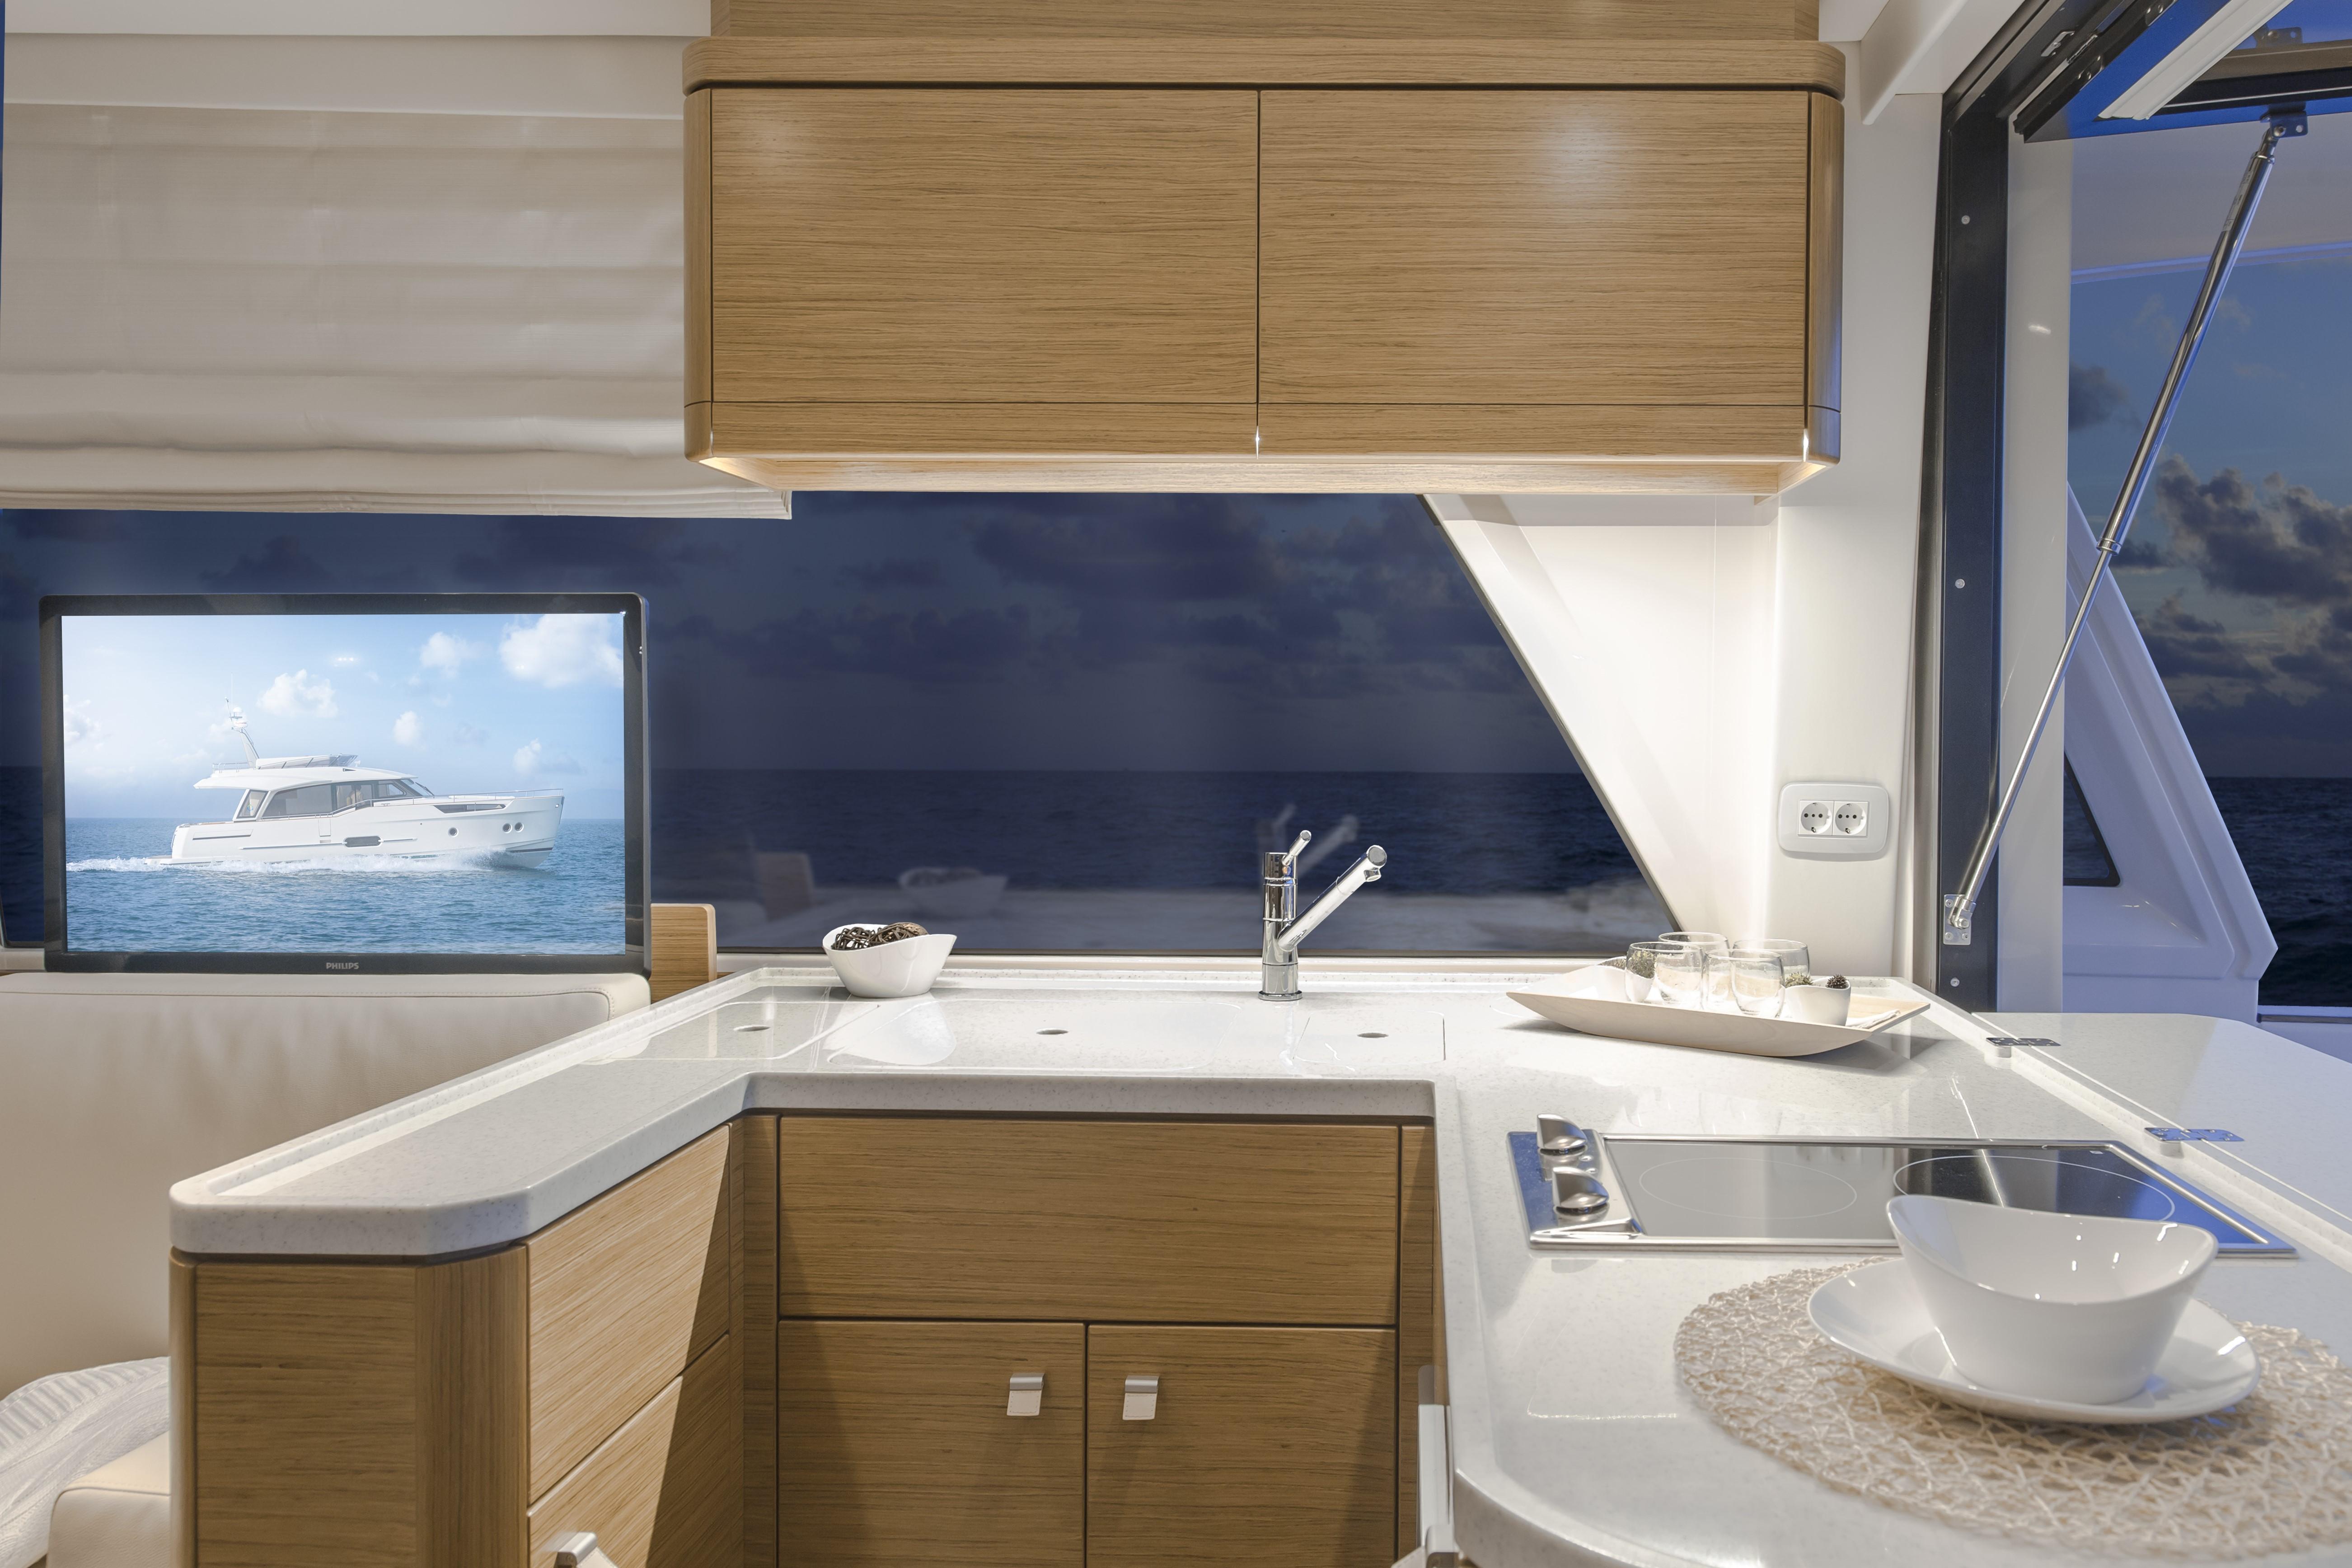 Cabinetry in Galley